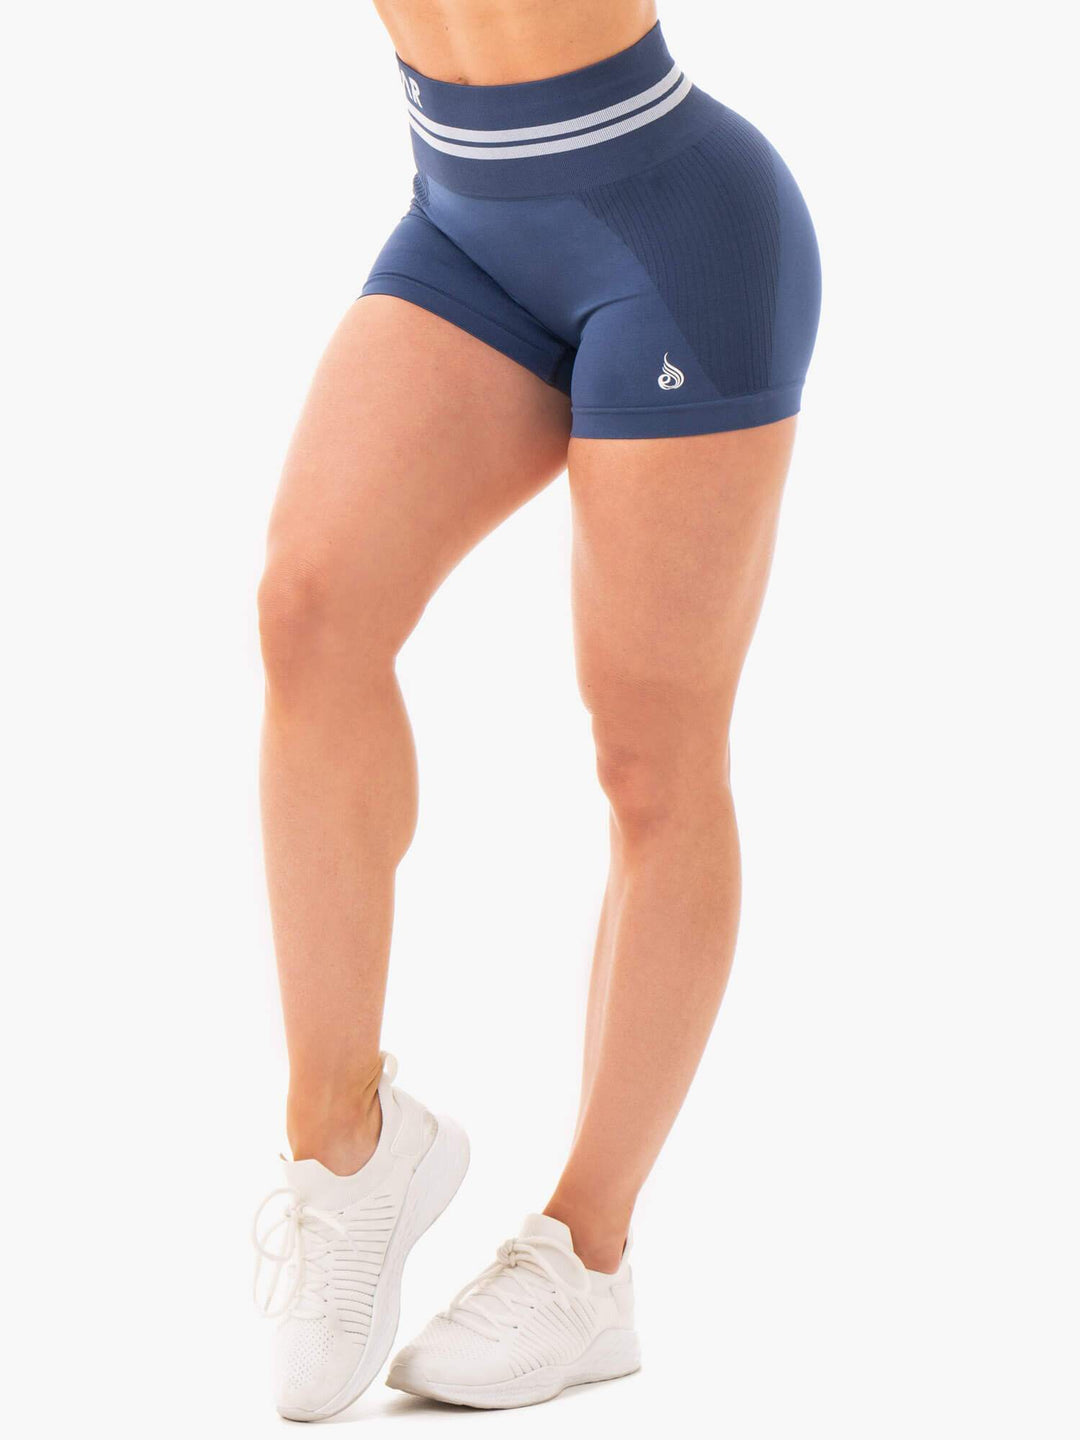 Freestyle Seamless High Waisted Shorts - Steel Blue Clothing Ryderwear 